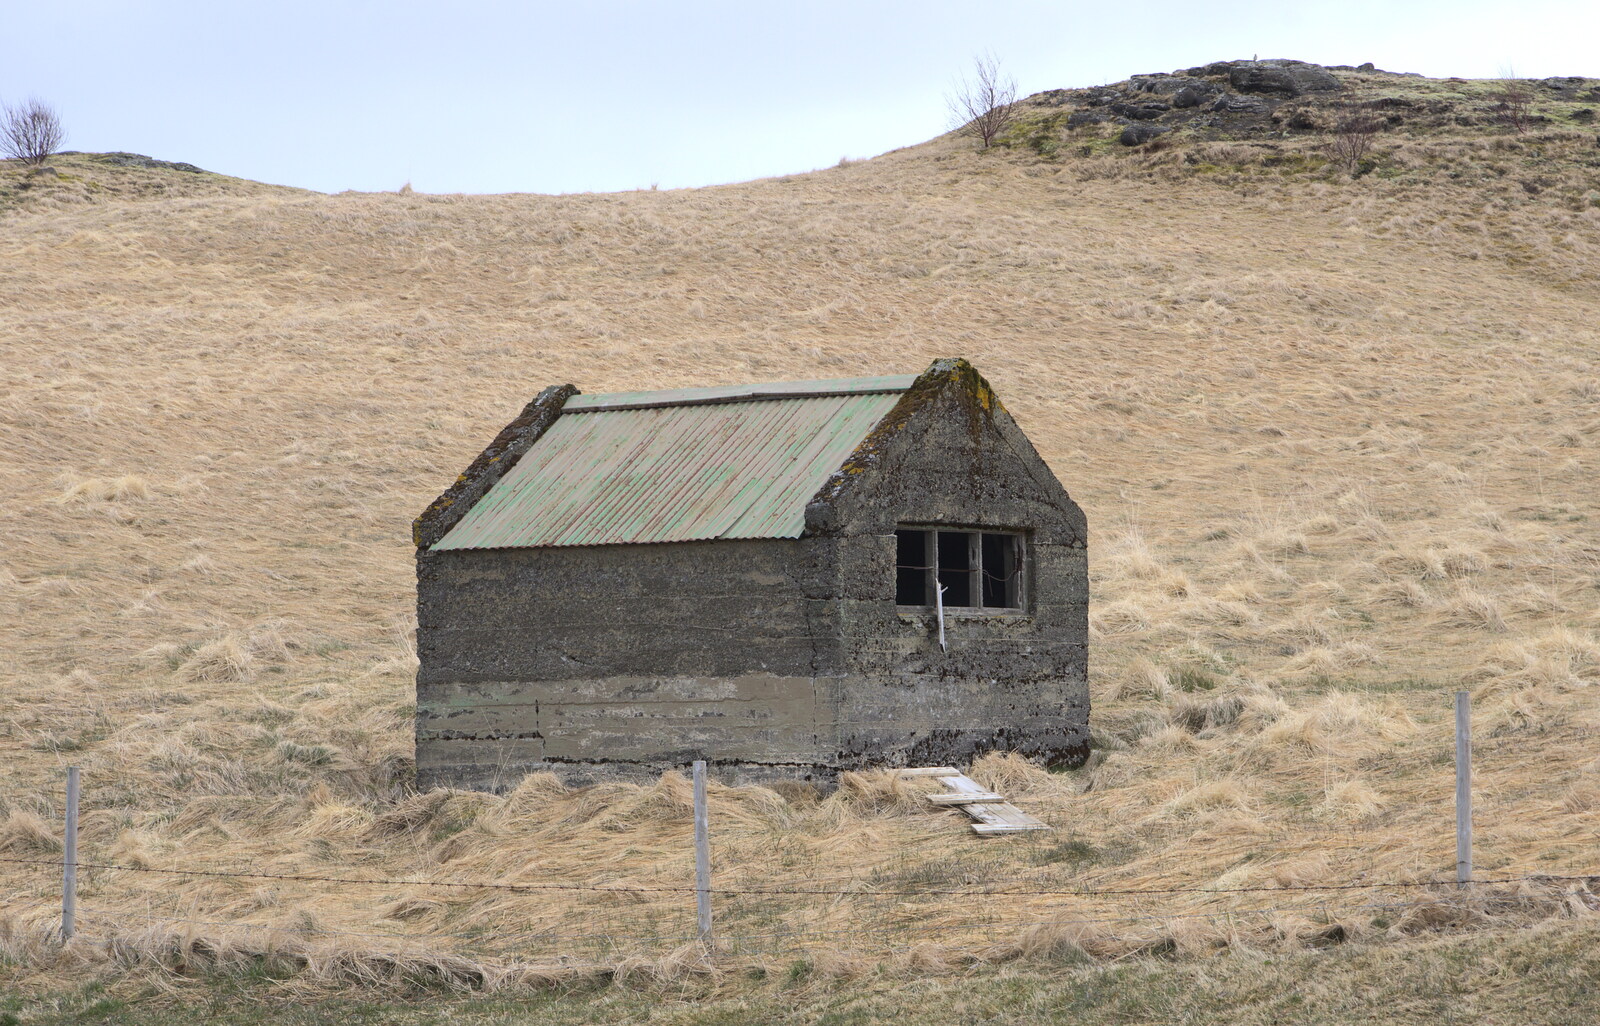 A derelict concrete hut from The Golden Circle of Ísland, Iceland - 22nd April 2017